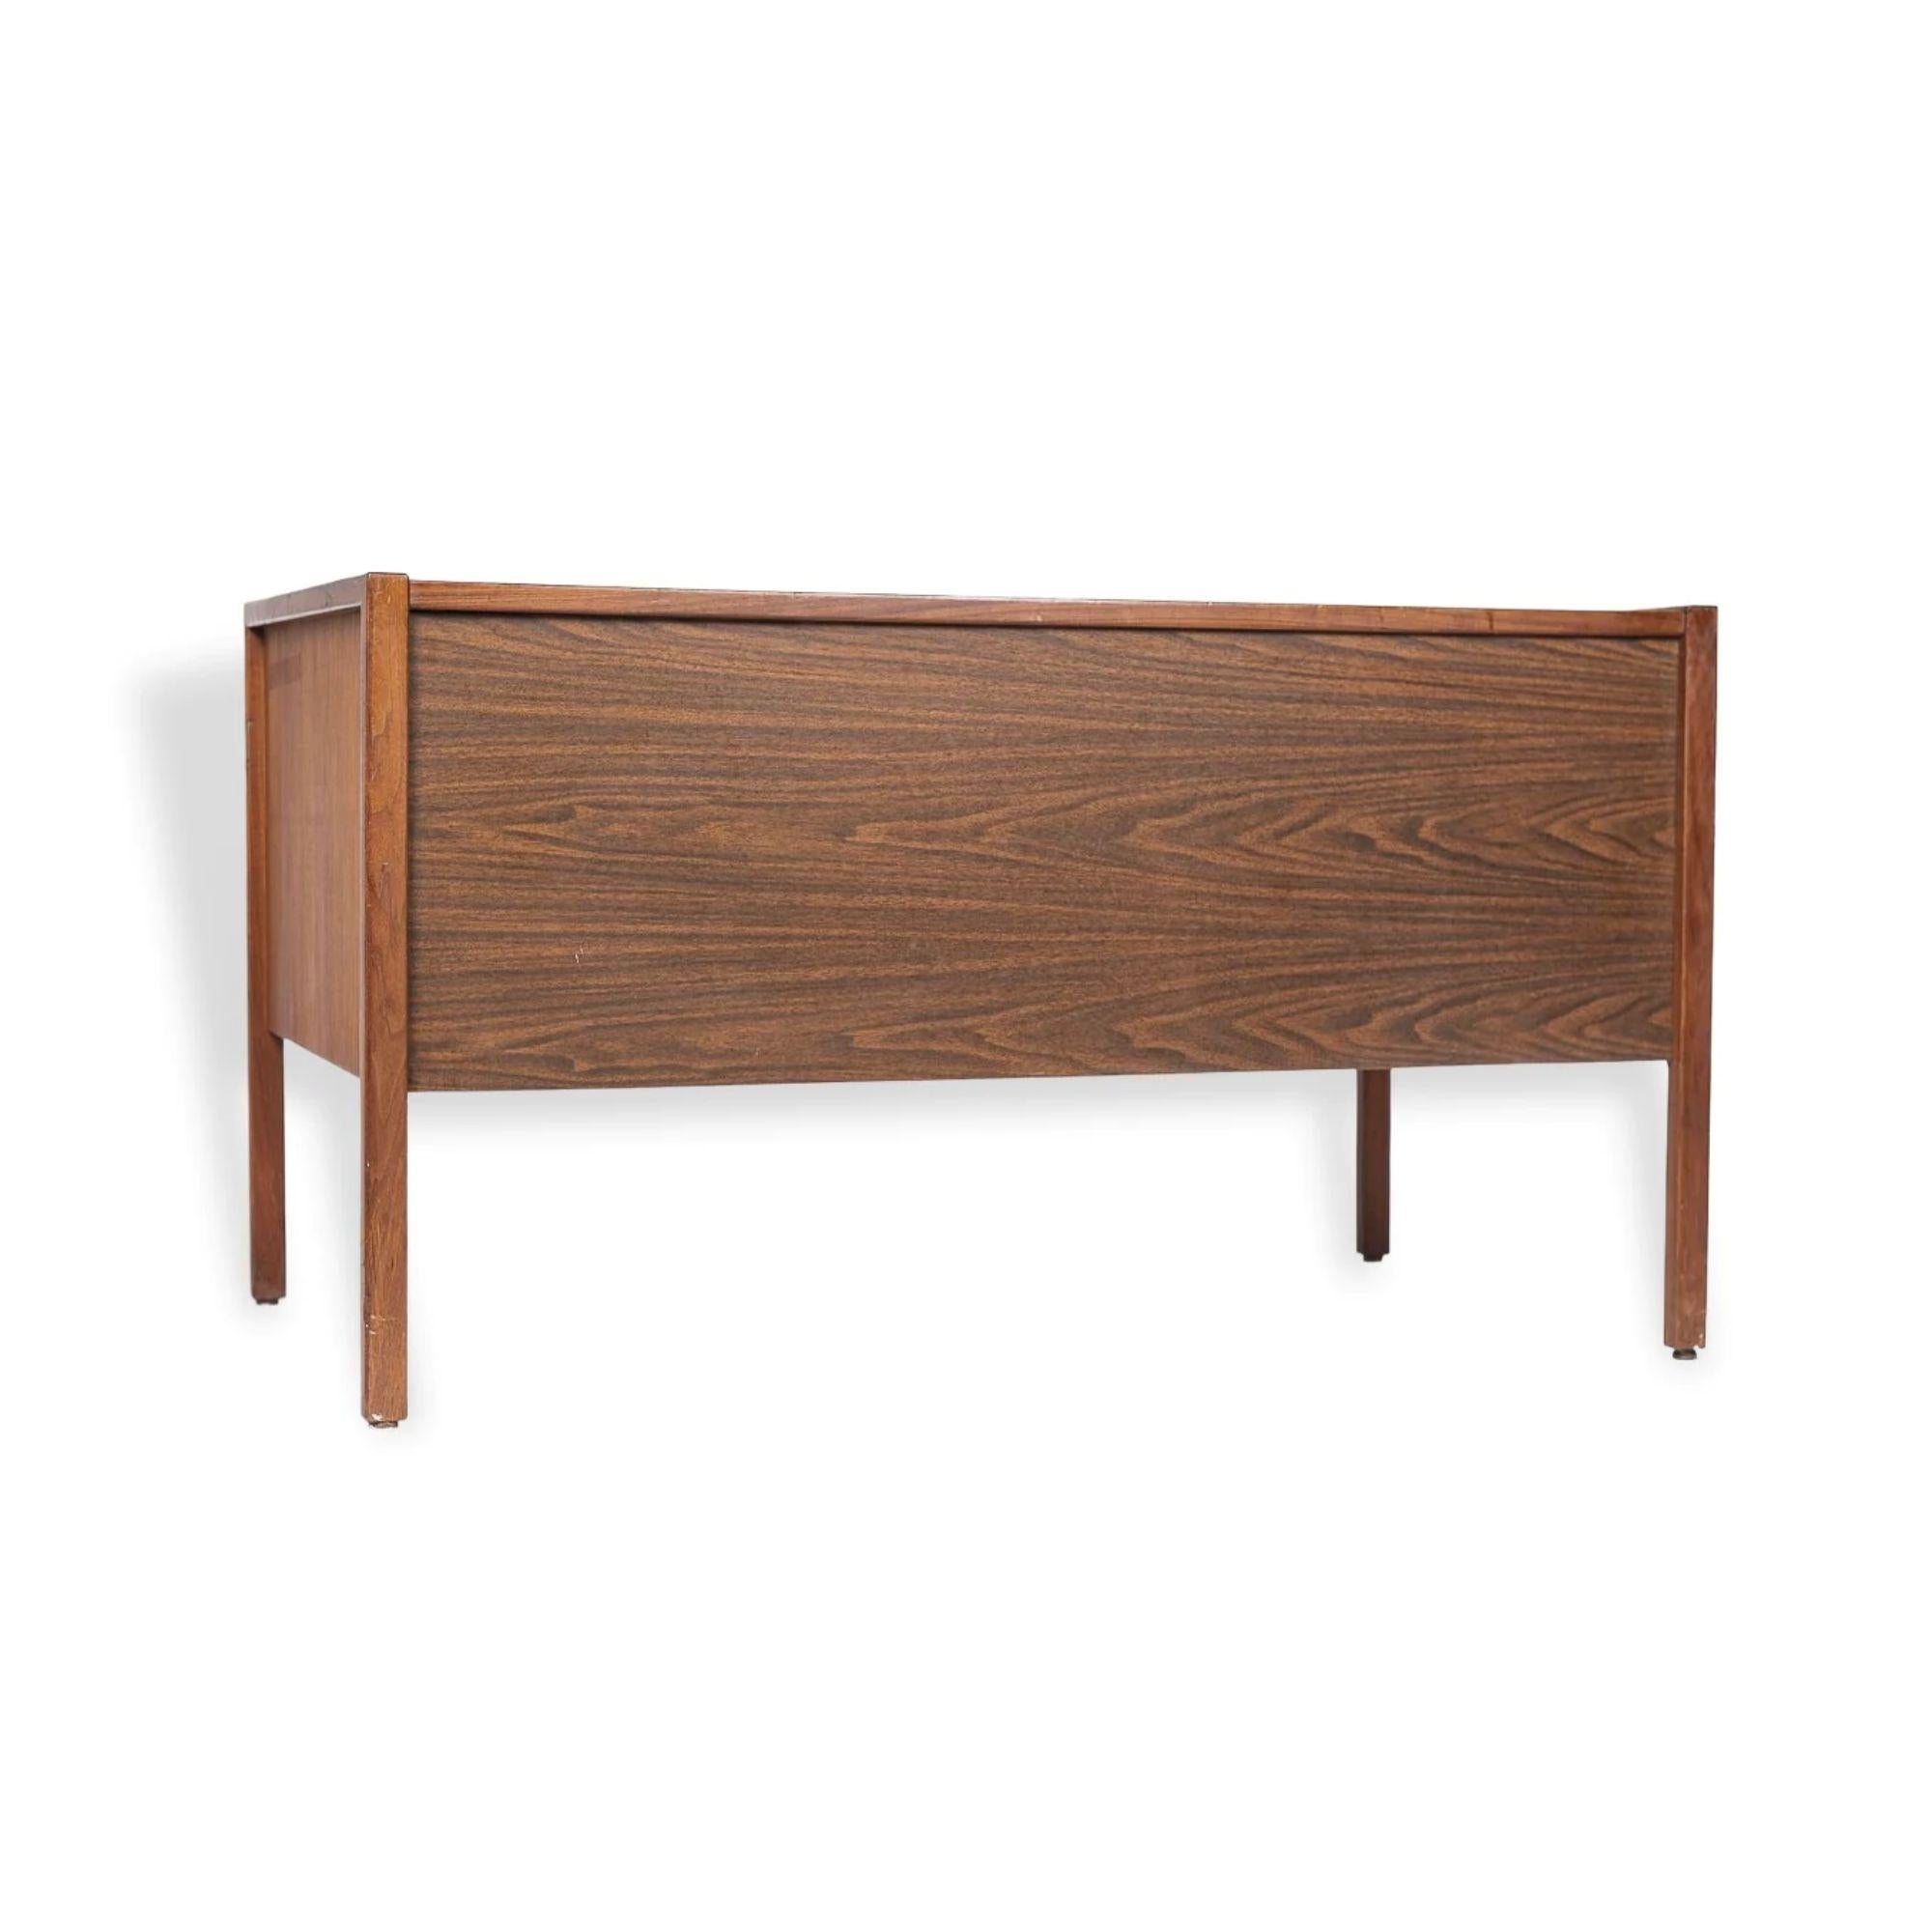 1960s Midcentury Desk in Wood & Laminate by Jens Risom In Good Condition For Sale In Detroit, MI